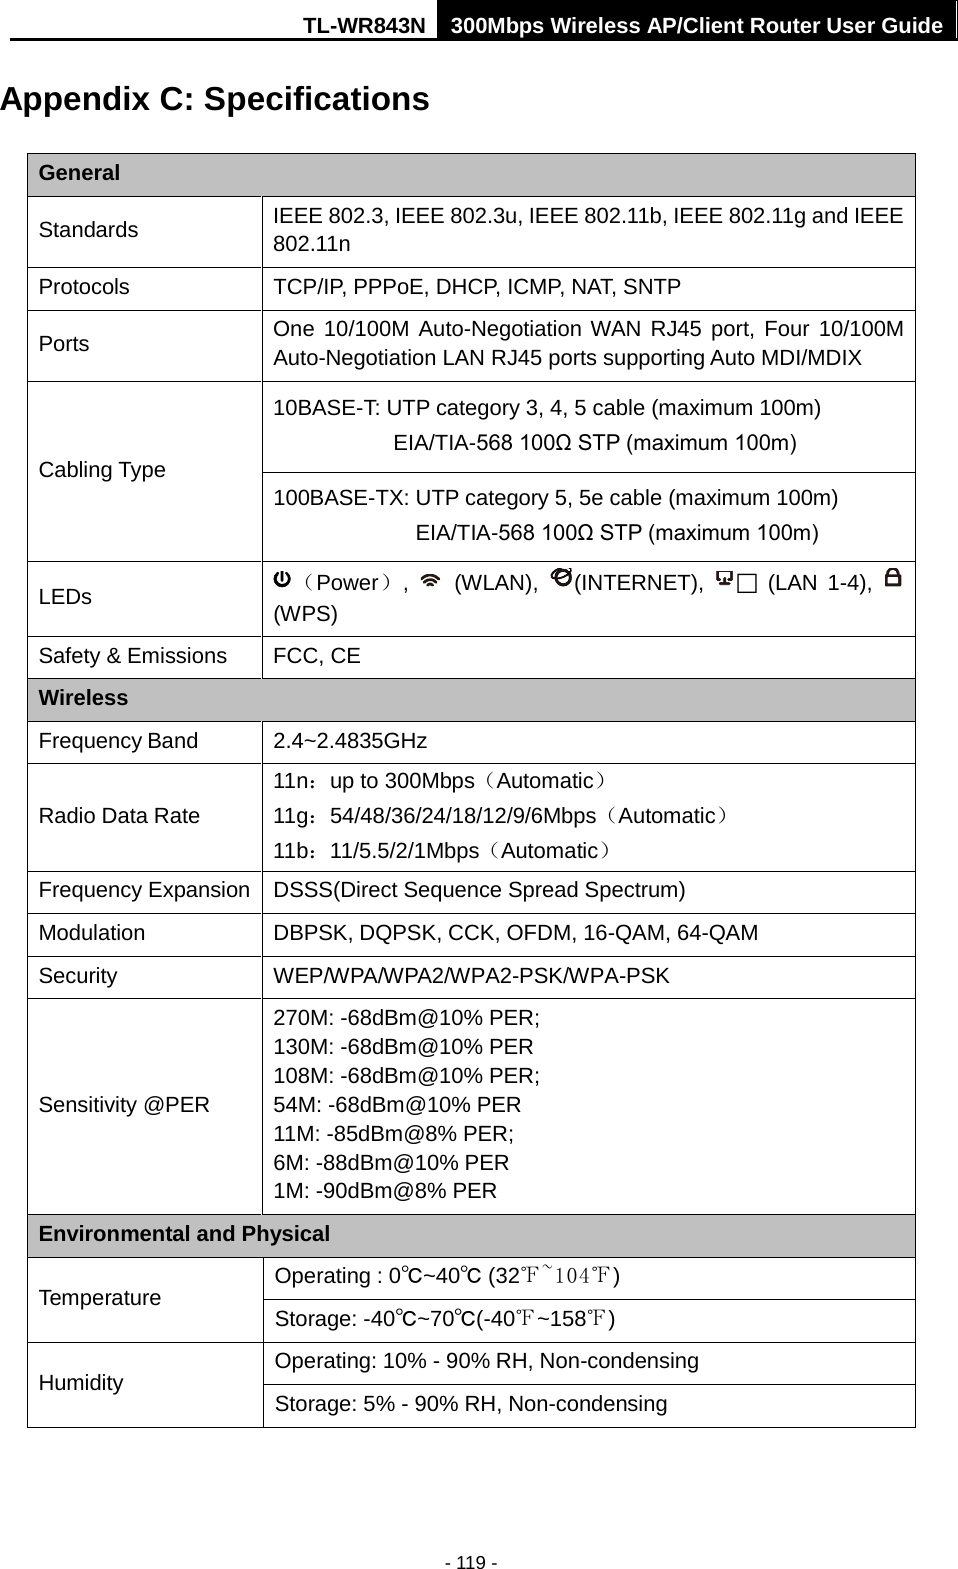 TL-WR843N 300Mbps Wireless AP/Client Router User Guide - 119 - Appendix C: Specifications General Standards IEEE 802.3, IEEE 802.3u, IEEE 802.11b, IEEE 802.11g and IEEE 802.11n Protocols TCP/IP, PPPoE, DHCP, ICMP, NAT, SNTP Ports One 10/100M Auto-Negotiation WAN RJ45 port, Four 10/100M Auto-Negotiation LAN RJ45 ports supporting Auto MDI/MDIX Cabling Type 10BASE-T: UTP category 3, 4, 5 cable (maximum 100m) EIA/TIA-568 100Ω STP (maximum 100m) 100BASE-TX: UTP category 5, 5e cable (maximum 100m) EIA/TIA-568 100Ω STP (maximum 100m) LEDs （Power）,  (WLAN),  (INTERNET),   (LAN  1-4), (WPS) Safety &amp; Emissions FCC, CE Wireless Frequency Band 2.4~2.4835GHz Radio Data Rate 11n：up to 300Mbps（Automatic） 11g：54/48/36/24/18/12/9/6Mbps（Automatic） 11b：11/5.5/2/1Mbps（Automatic） Frequency Expansion DSSS(Direct Sequence Spread Spectrum) Modulation DBPSK, DQPSK, CCK, OFDM, 16-QAM, 64-QAM Security WEP/WPA/WPA2/WPA2-PSK/WPA-PSK Sensitivity @PER 270M: -68dBm@10% PER; 130M: -68dBm@10% PER 108M: -68dBm@10% PER; 54M: -68dBm@10% PER 11M: -85dBm@8% PER;   6M: -88dBm@10% PER 1M: -90dBm@8% PER Environmental and Physical Temperature Operating : 0℃~40℃ (32℉~104℉) Storage: -40℃~70℃(-40℉~158℉) Humidity Operating: 10% - 90% RH, Non-condensing Storage: 5% - 90% RH, Non-condensing 